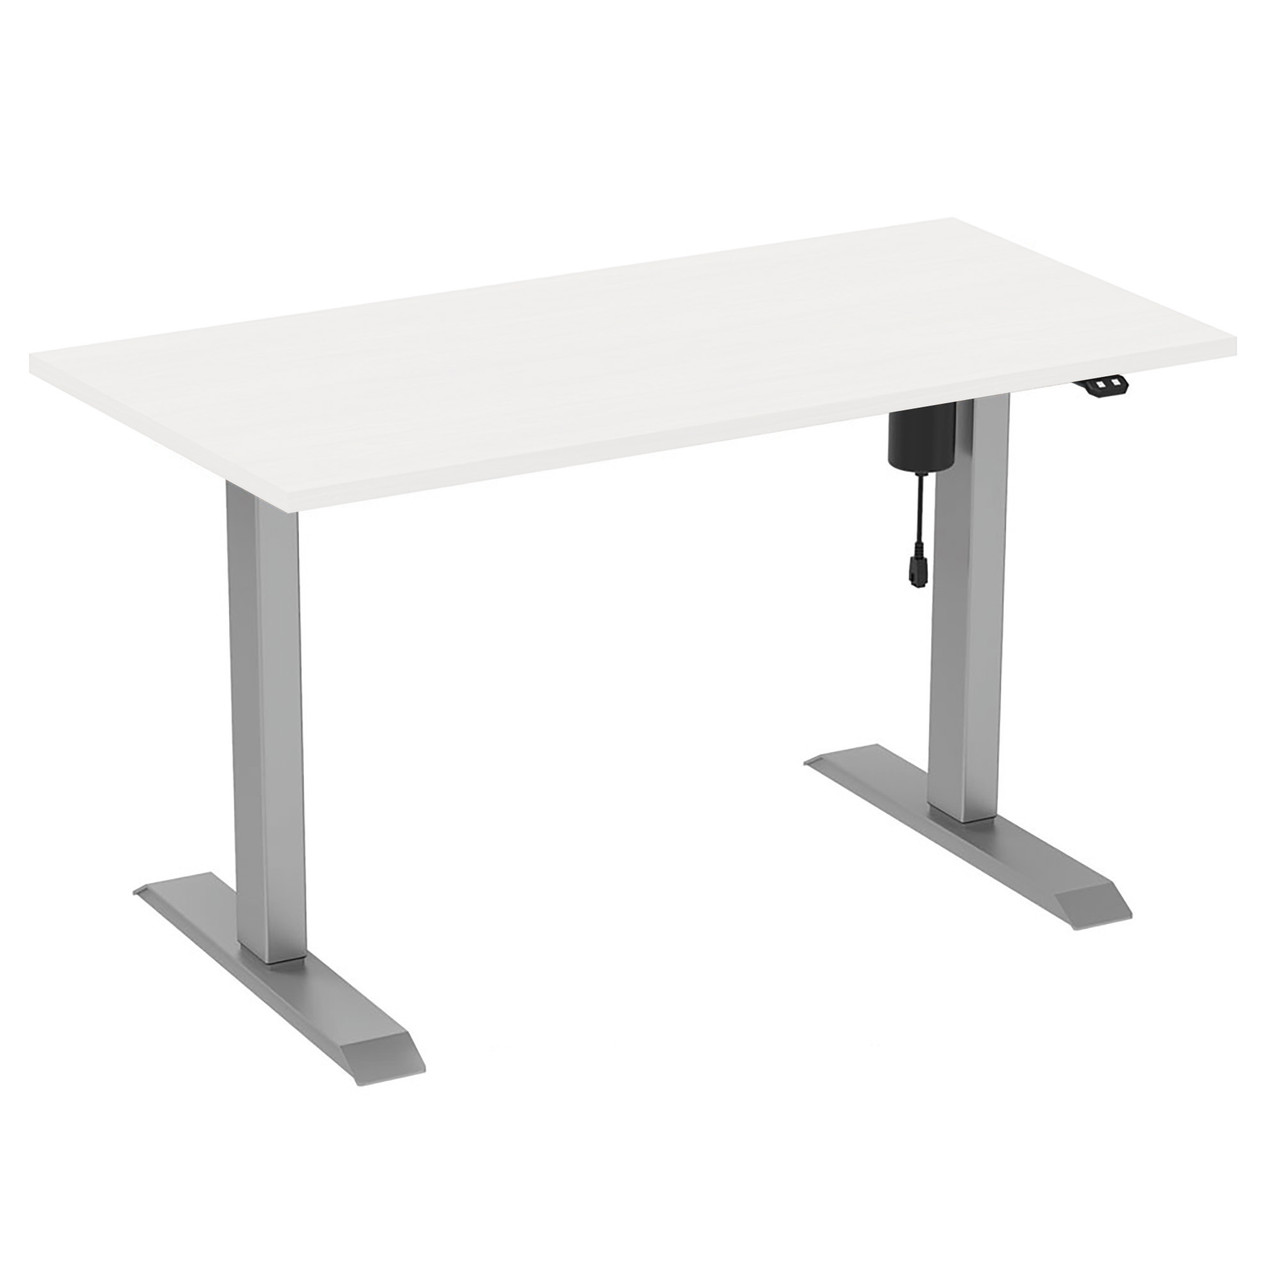 2-Stage, Adjustable Height 30″D x 60″W Desk w/ Silver Base & White Top